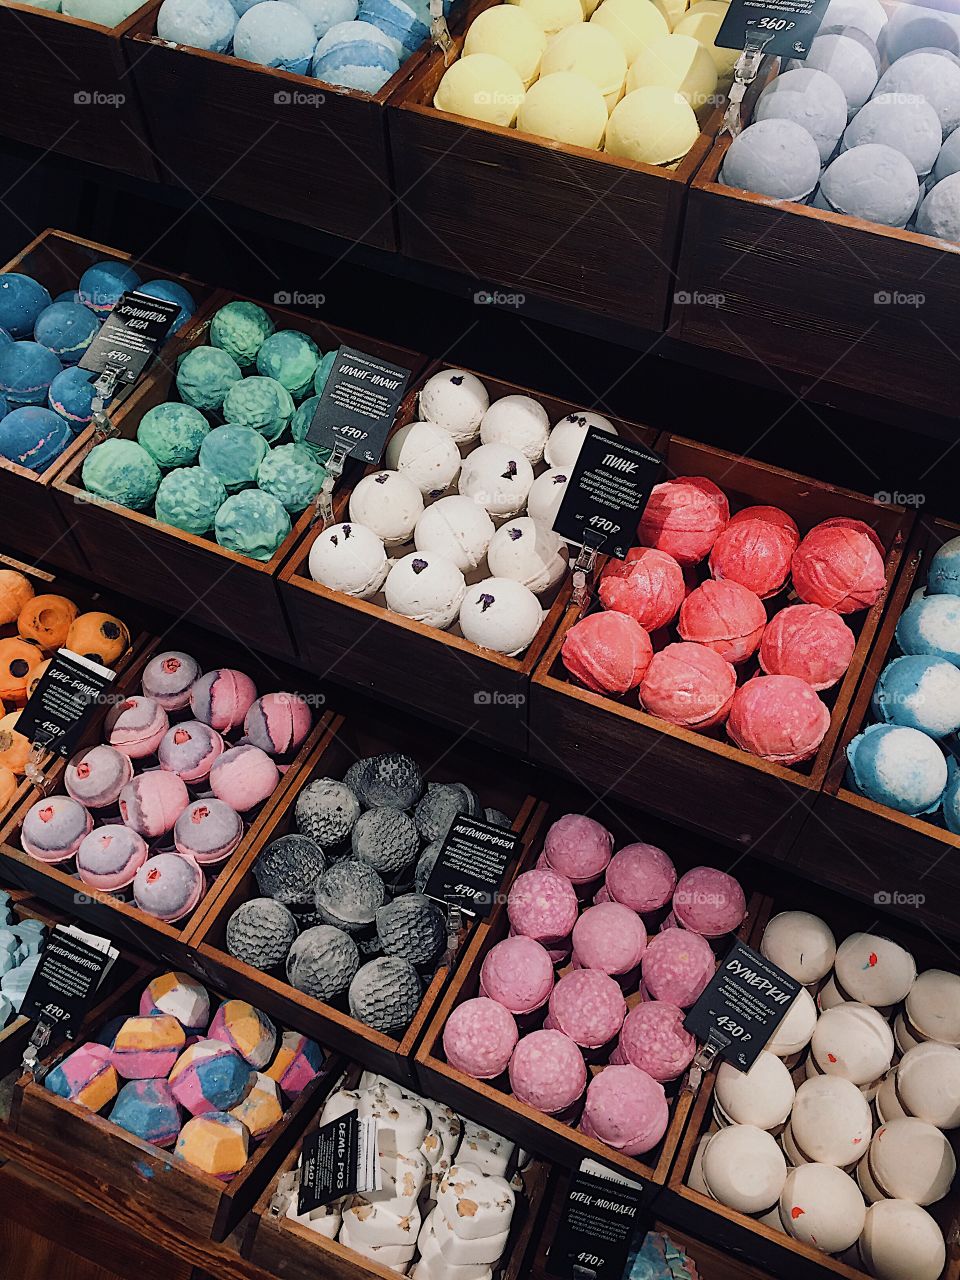 This photo was taken in a shop of pretty, colorful and good smelling bath bombs.